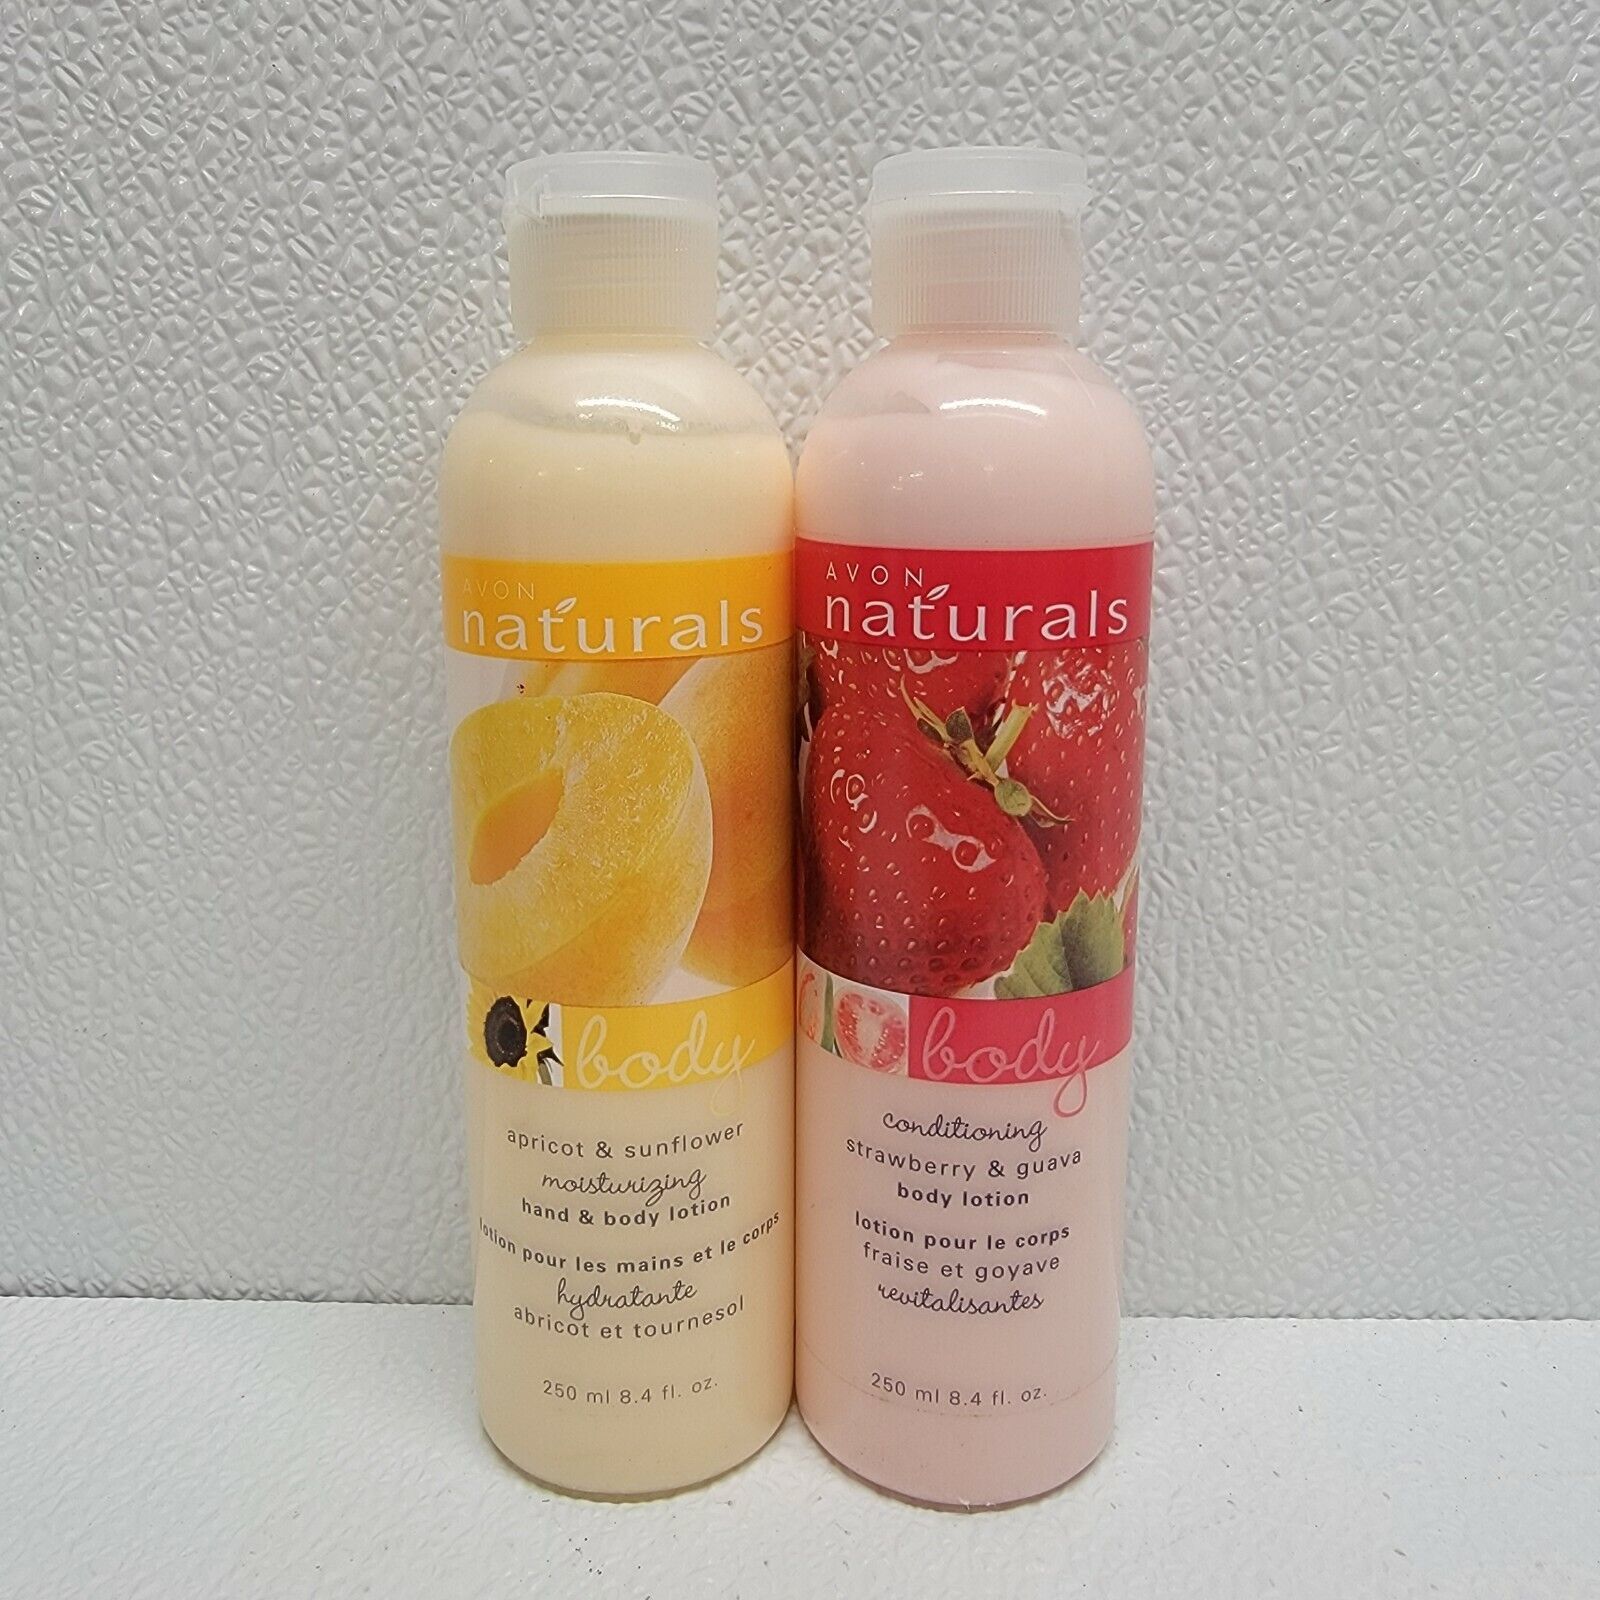 Primary image for AVON Natural Strawberry & Guava - Apricot & Sunflower - Body Lotion 8.4 oz NEW